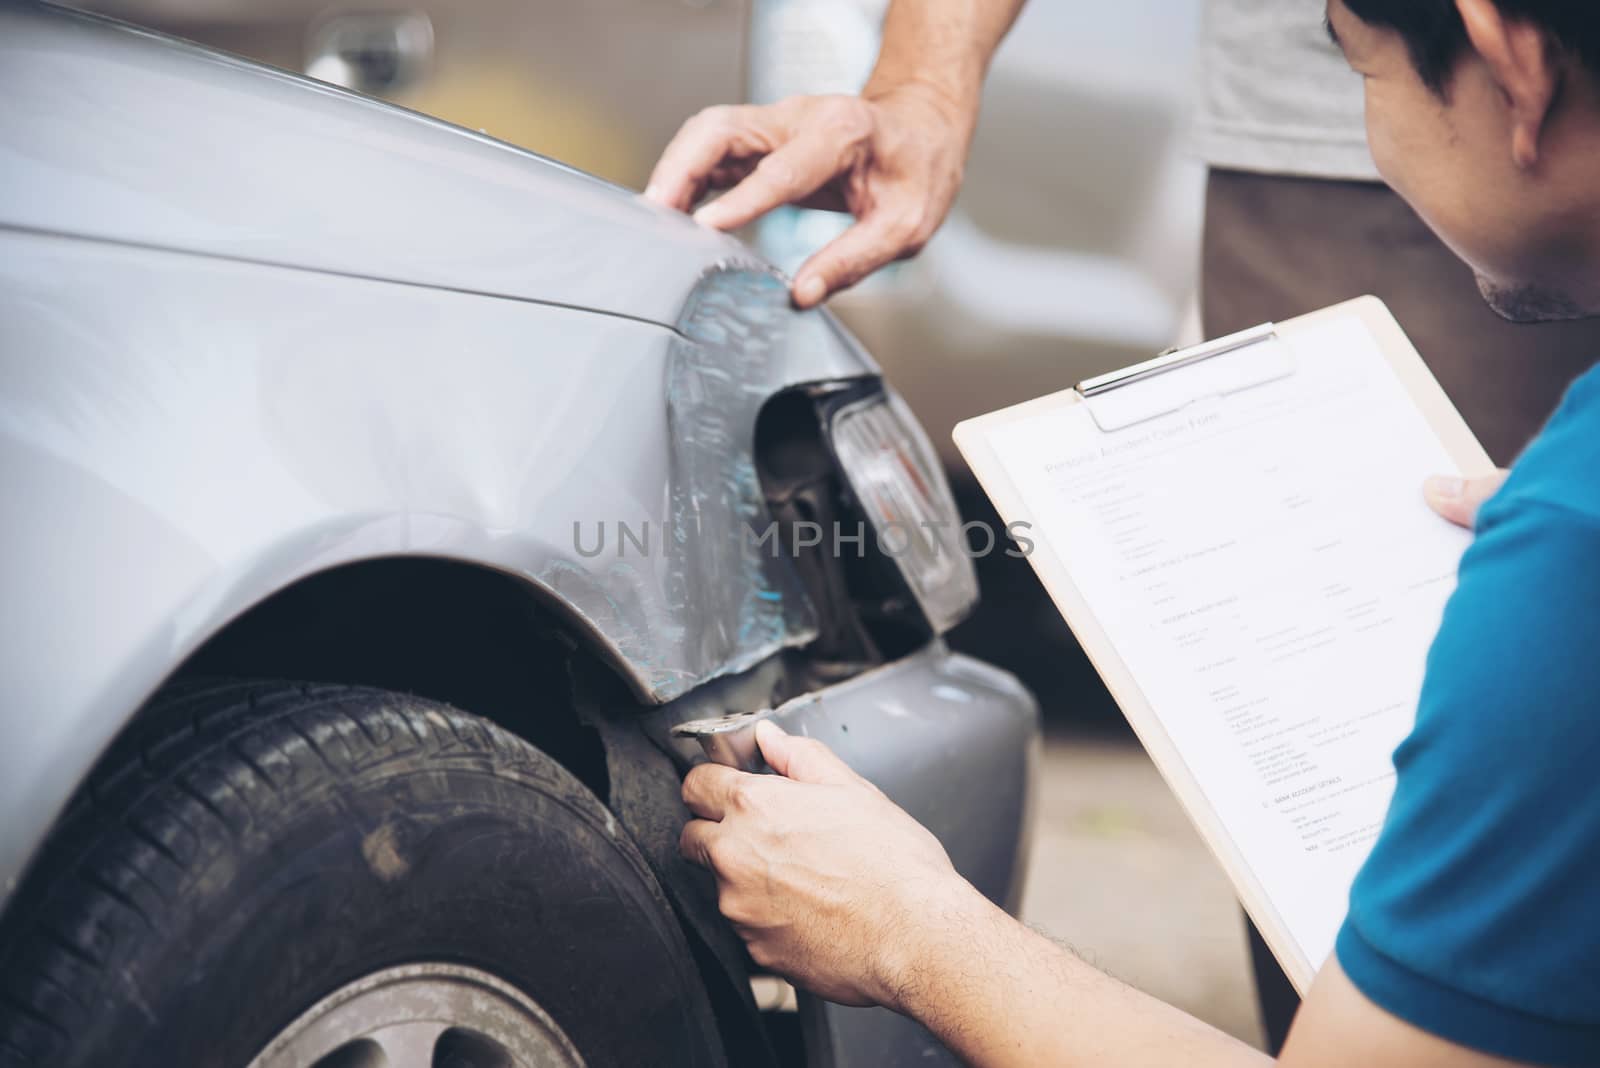 Insurance agent working during on site car accident claim process - people and car insurance claim concept